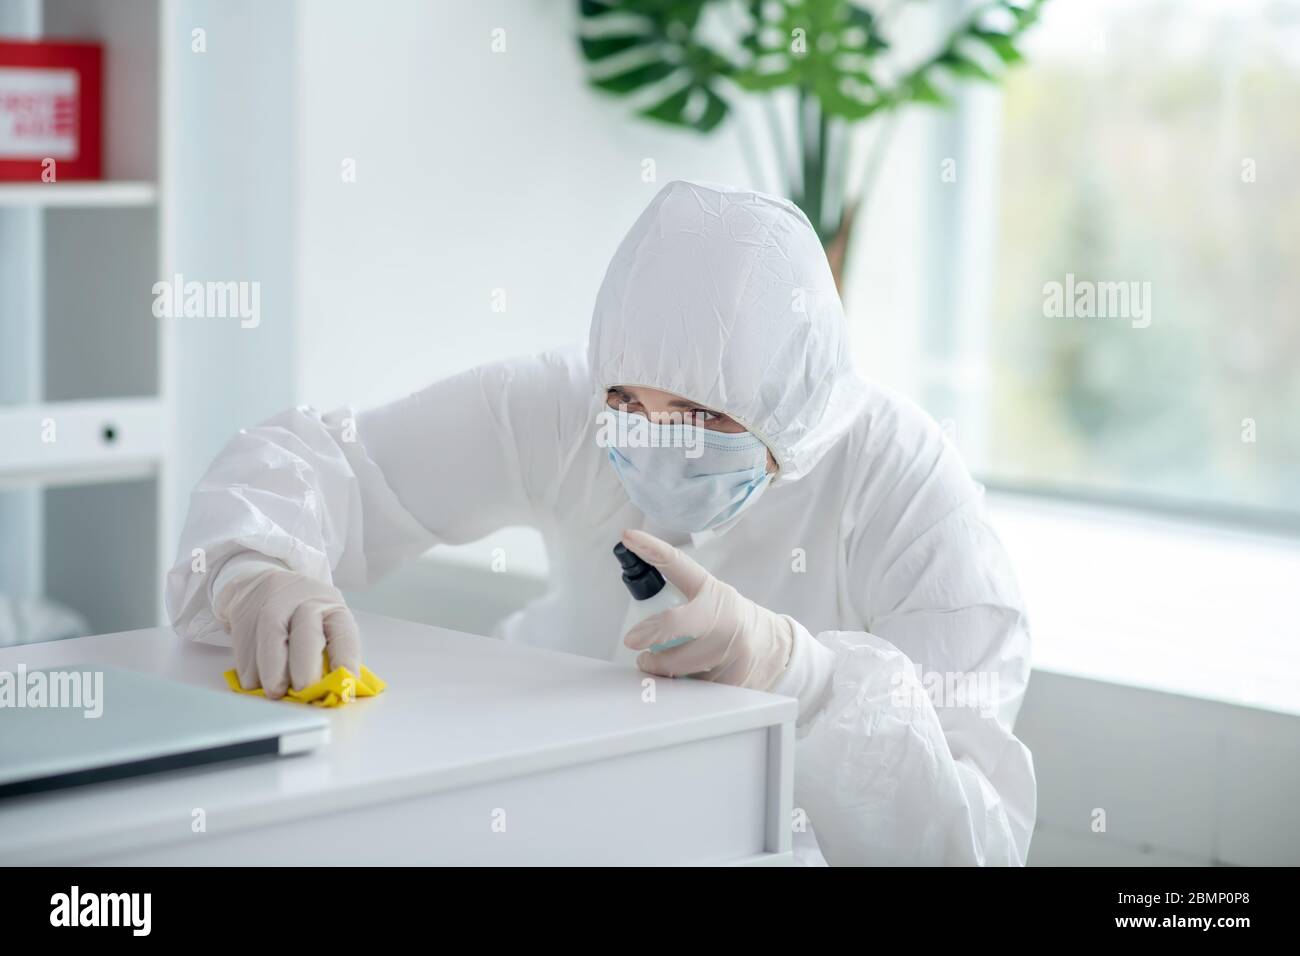 Medical worker in protective clothing and medical mask sprays disinfectant on table Stock Photo